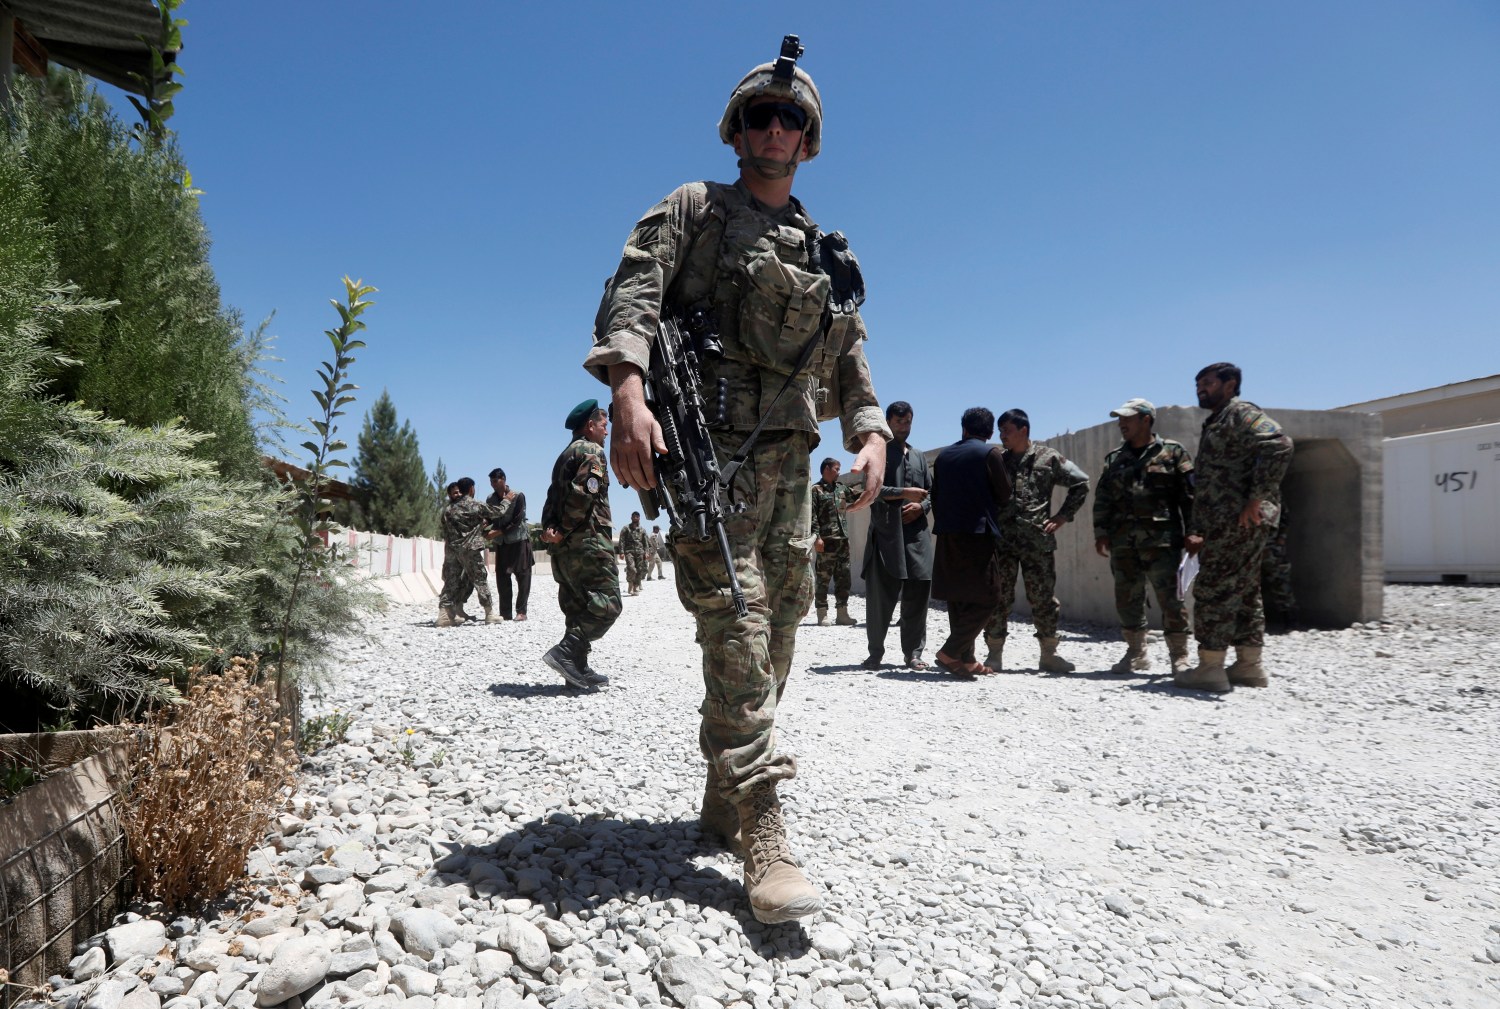 FILE PHOTO: A U.S. soldier keeps watch at an Afghan National Army (ANA) base in Logar province, Afghanistan August 5, 2018. REUTERS/Omar Sobhani/File Photo